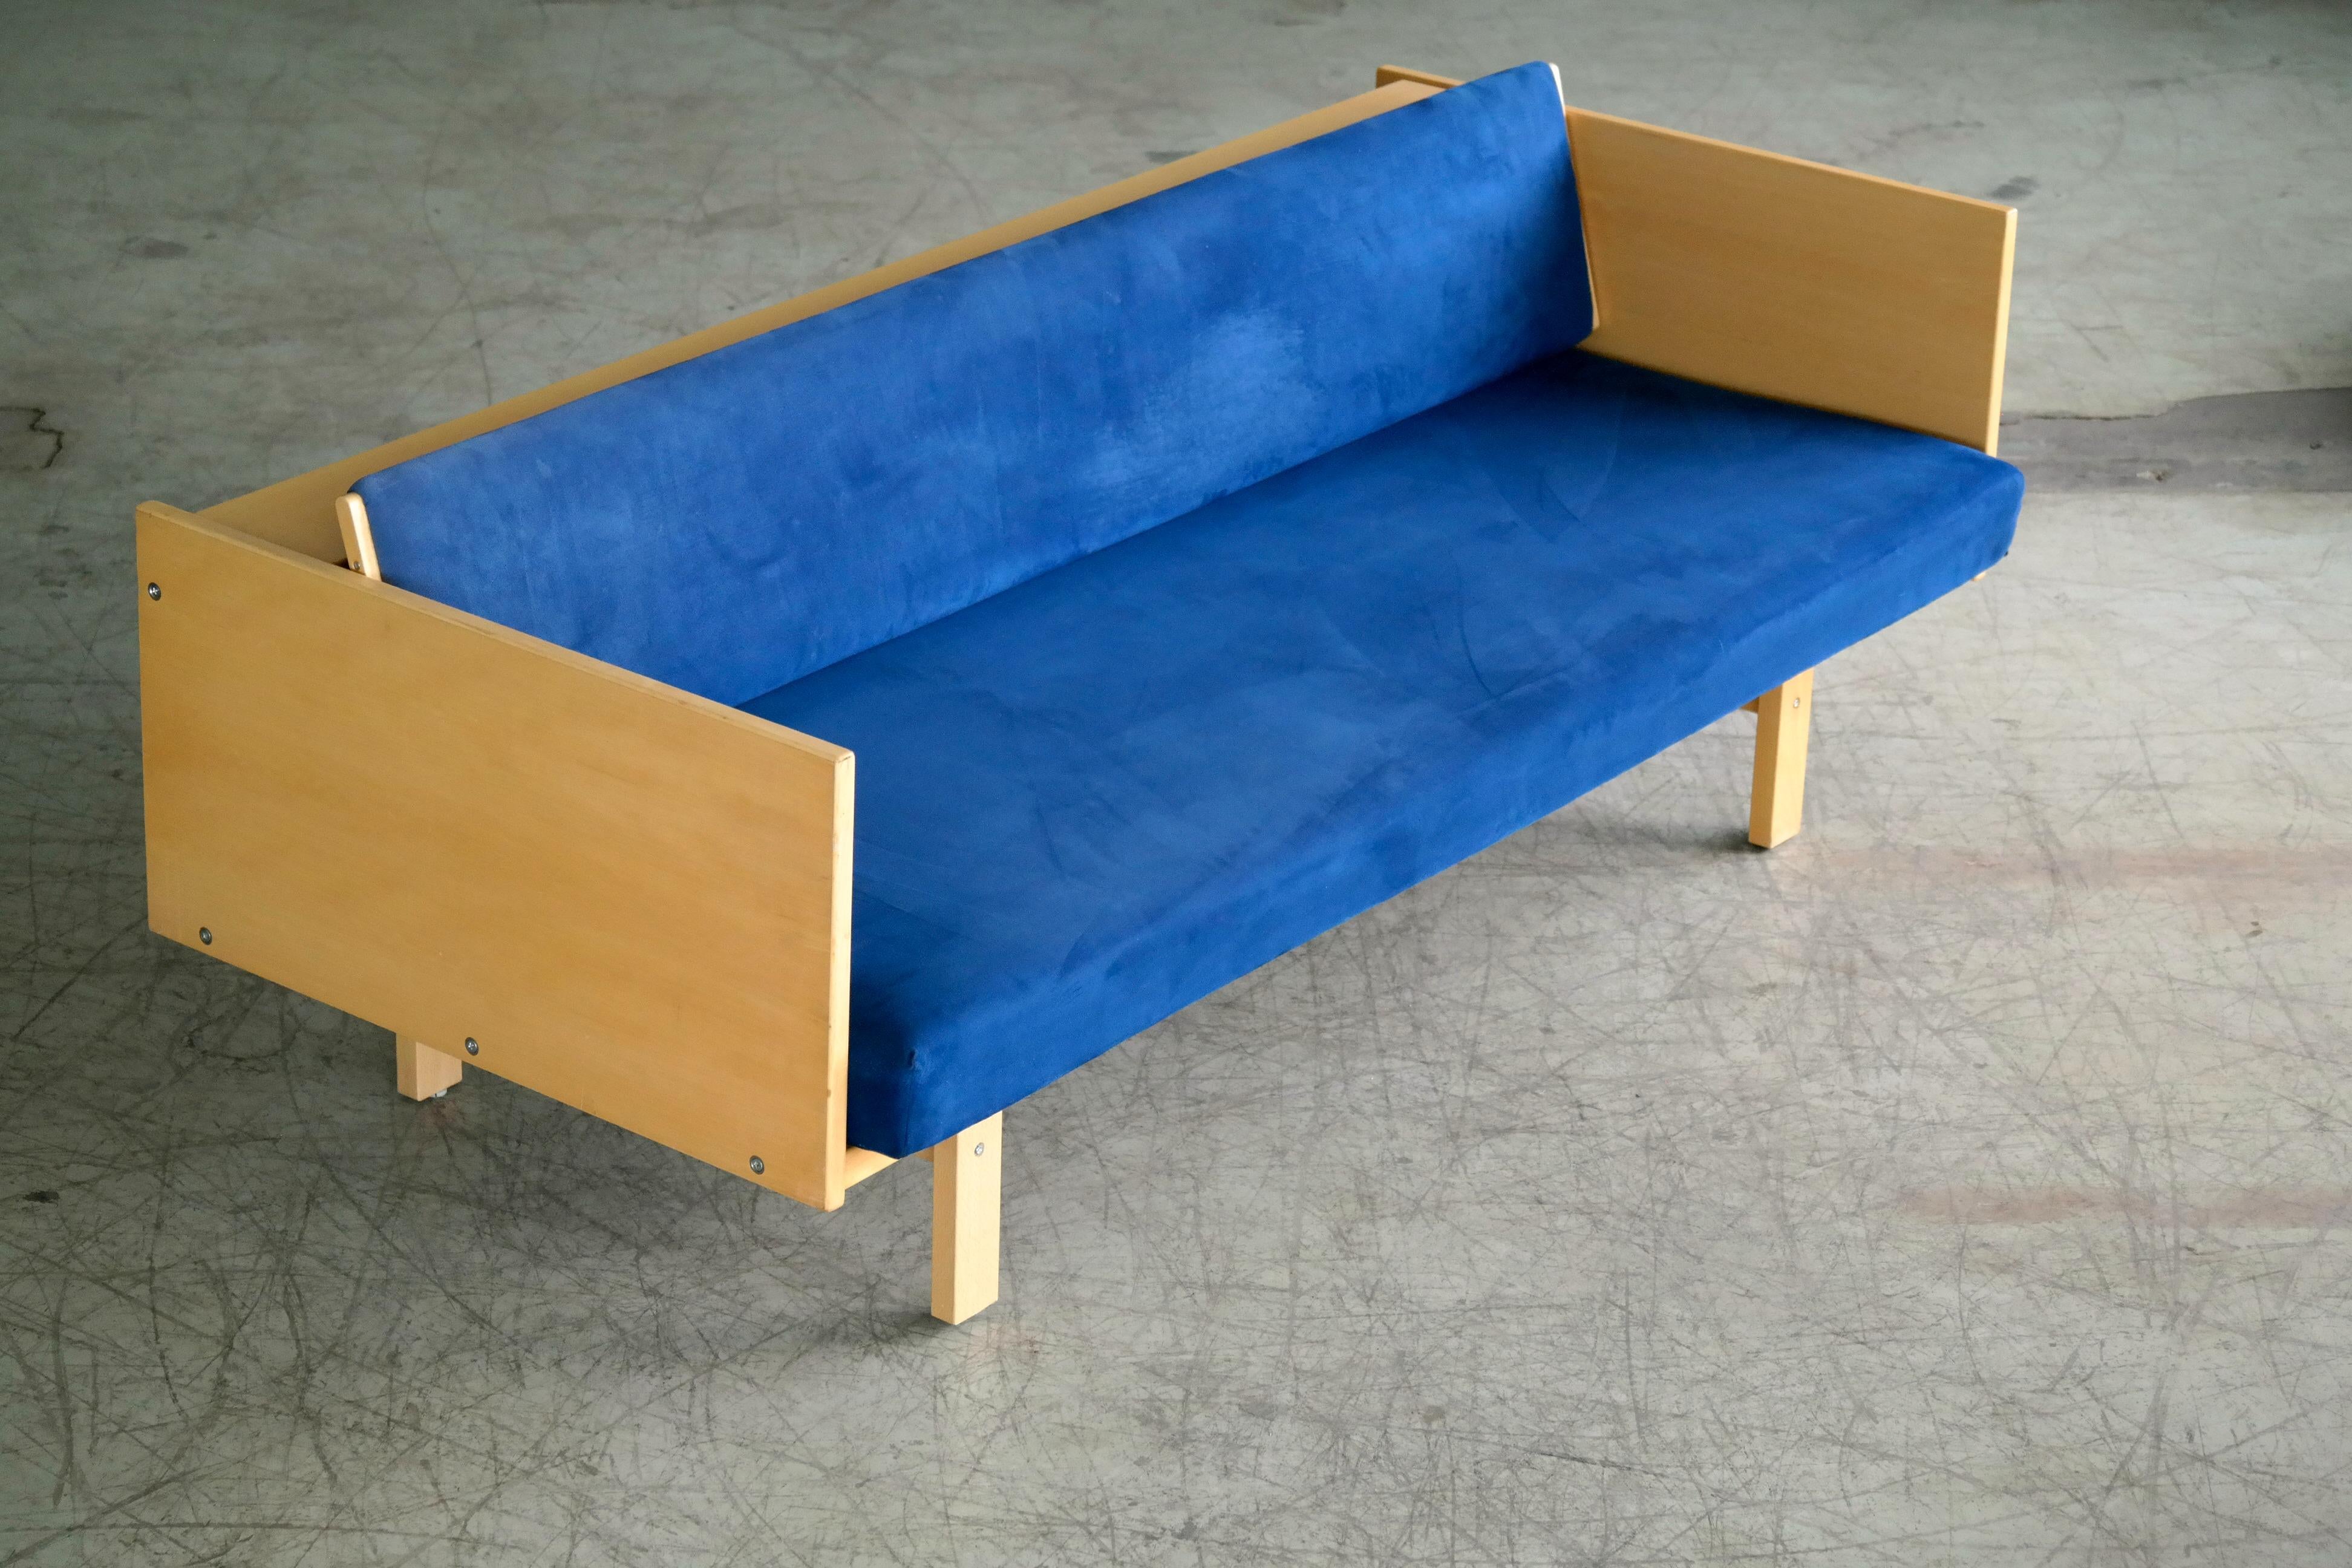 Hans Wegner's iconic daybed designed in 1954 and produced by GETAMA in Denmark. This production is a newer date probably around 2000. The daybed is made from beech veneer raised on solid beech legs and has it's original spring loaded mattress